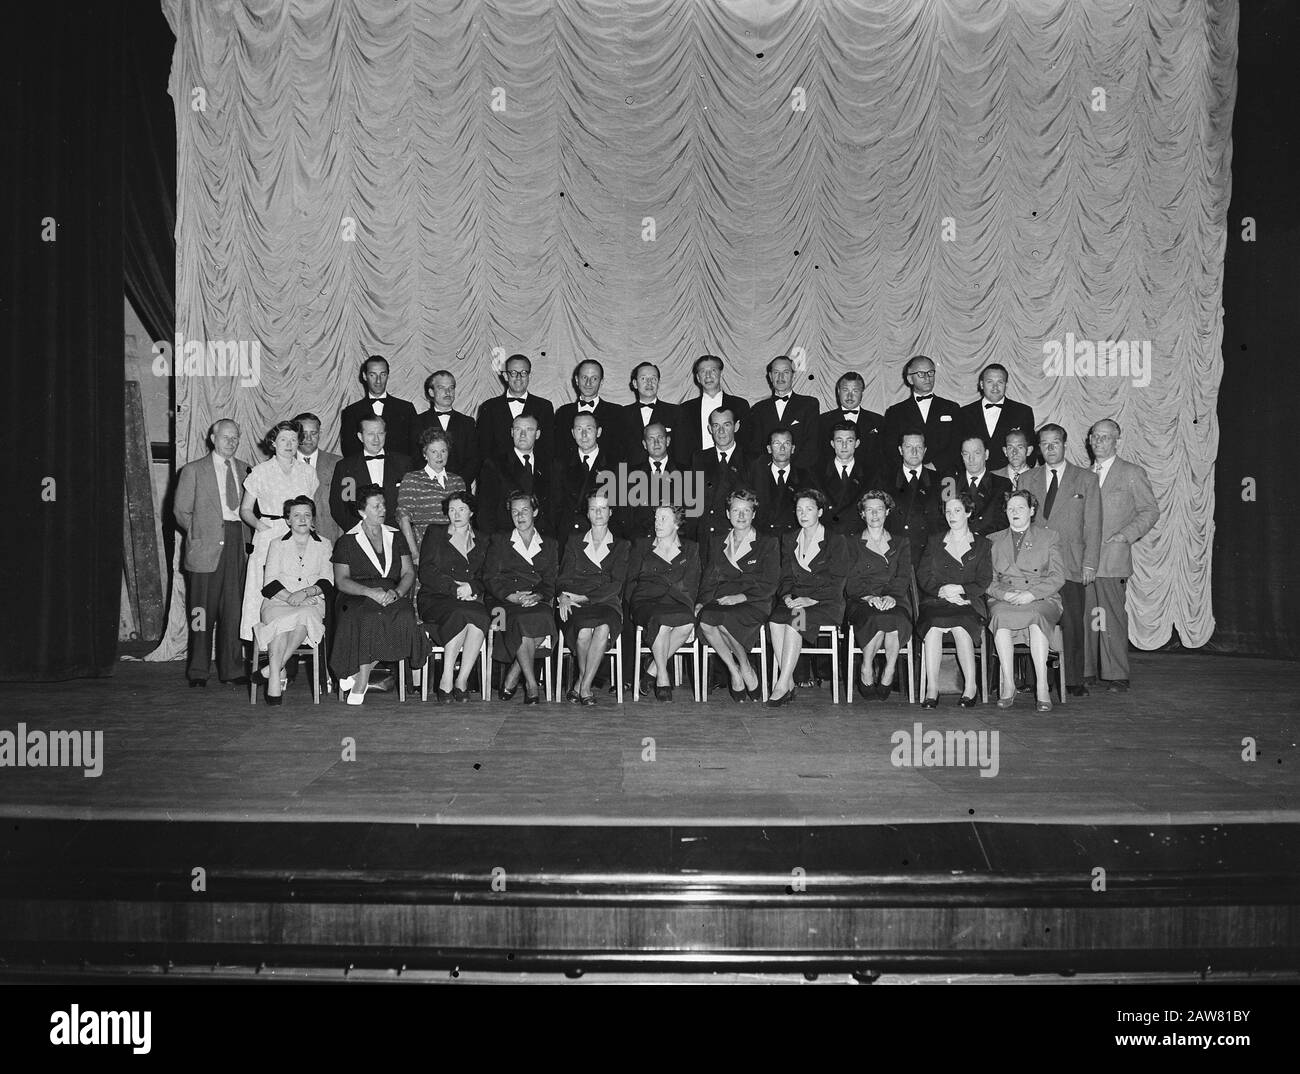 Mission City Theater Date: July 12, 1955 Person Name: City Theater Stock Photo